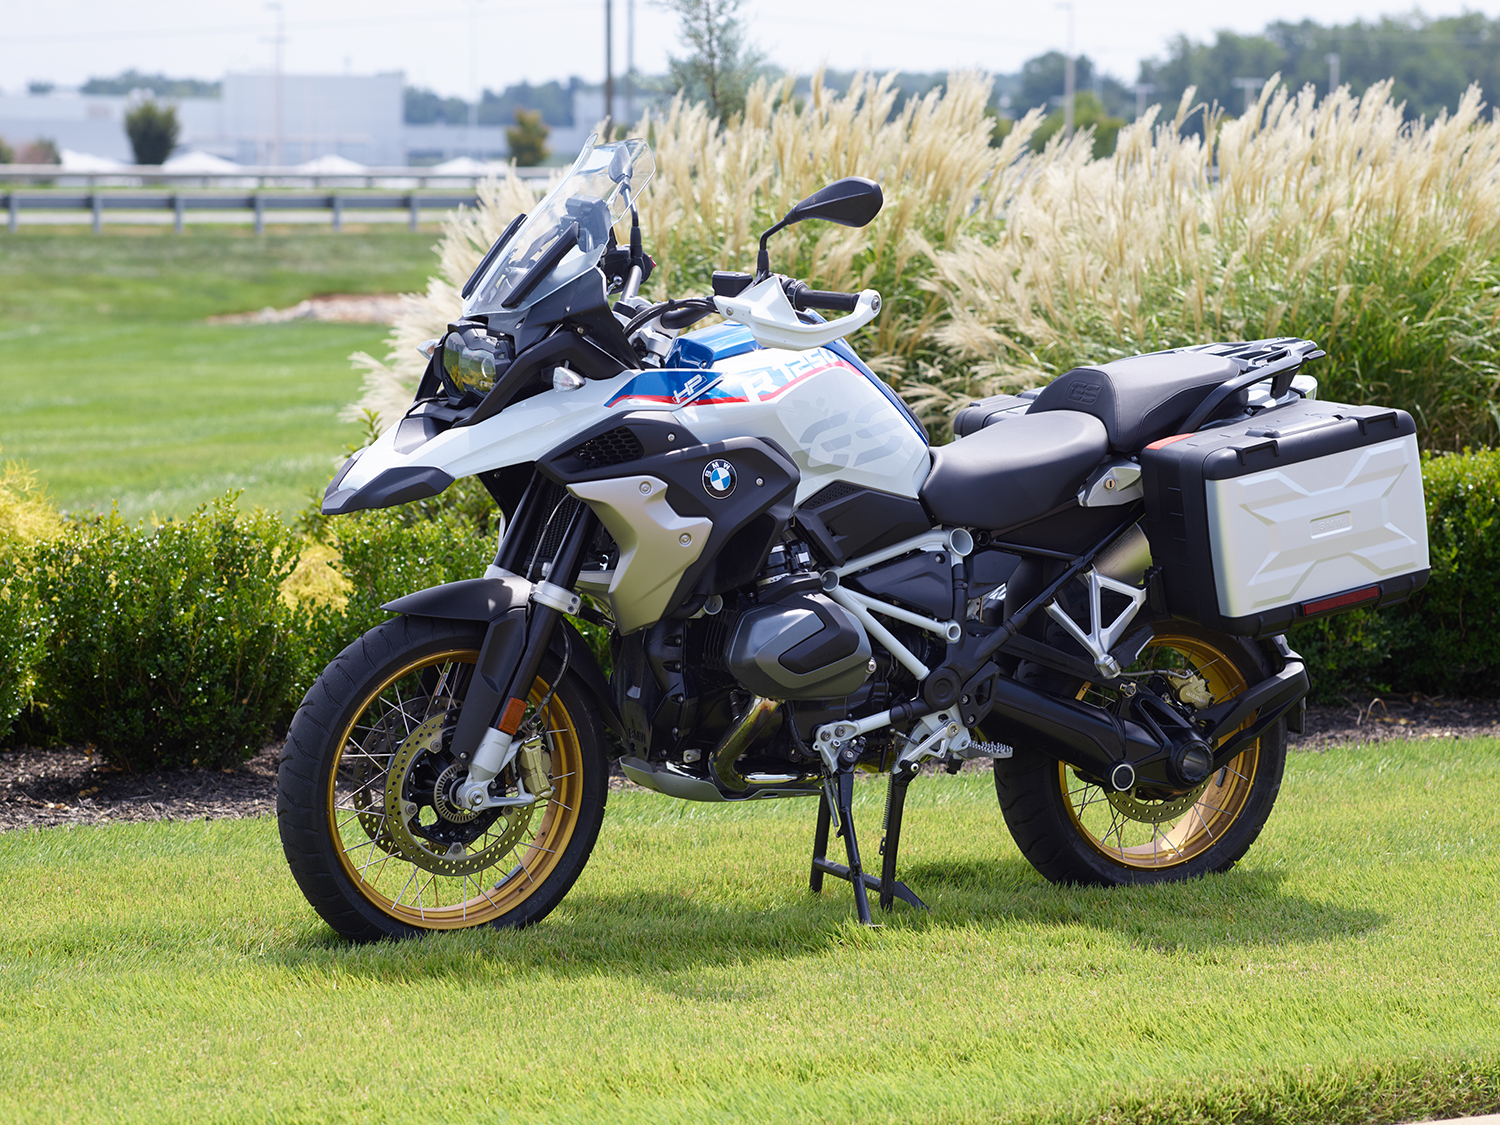 A 2,500-Mile Review Of The 2019 BMW R 1250 GS